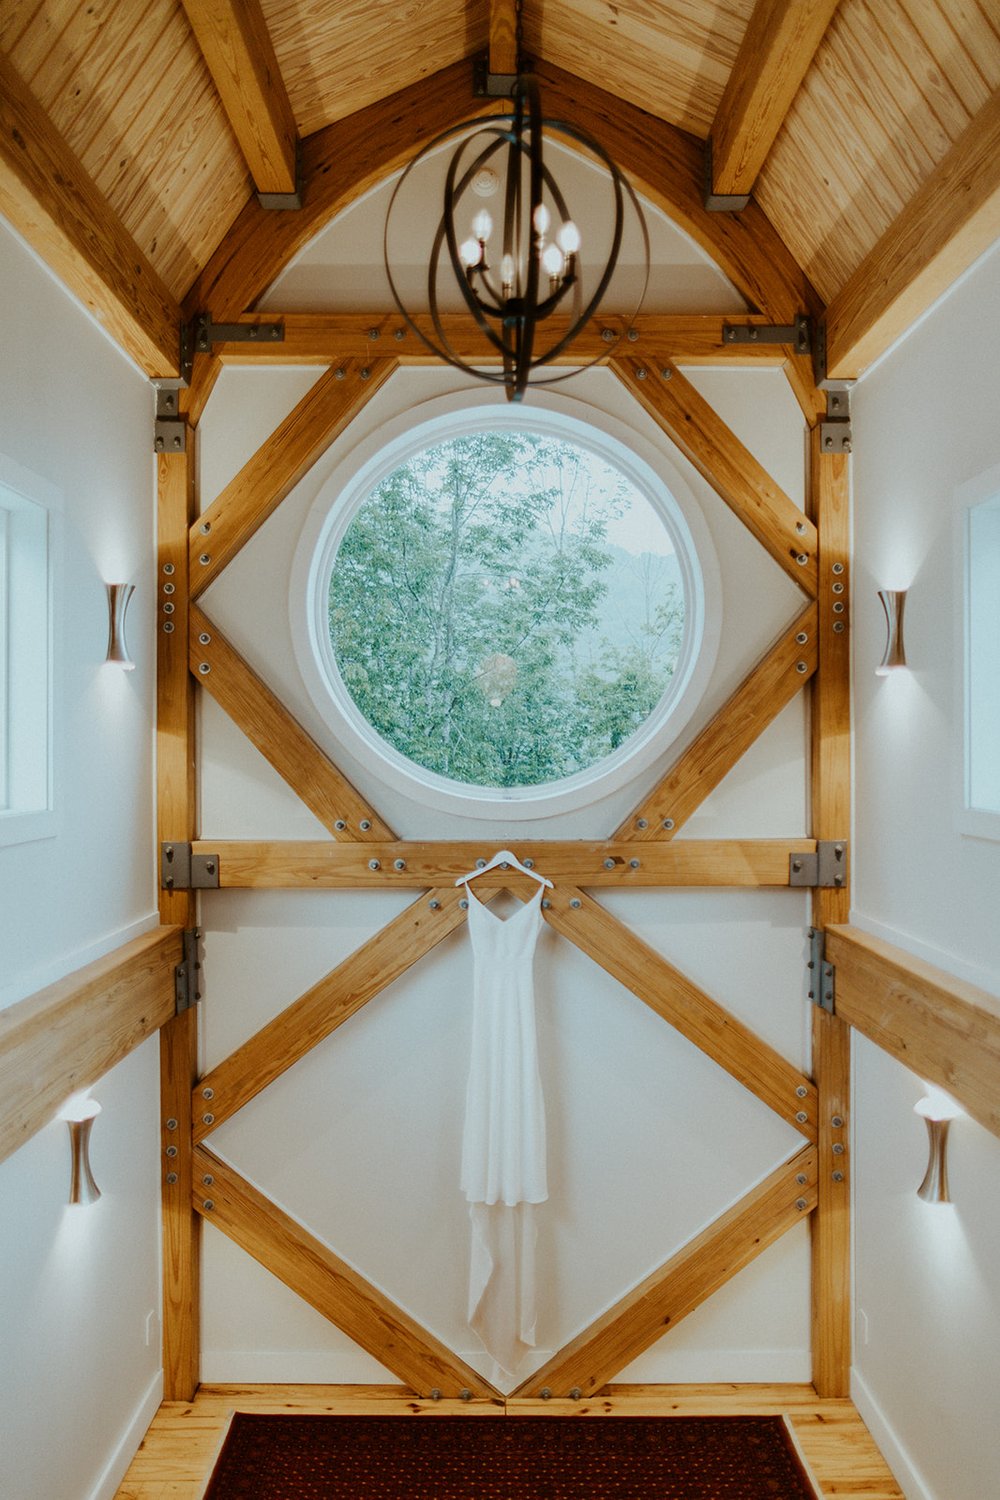 The brides gown hangs just below a window view of the catskill mountains.